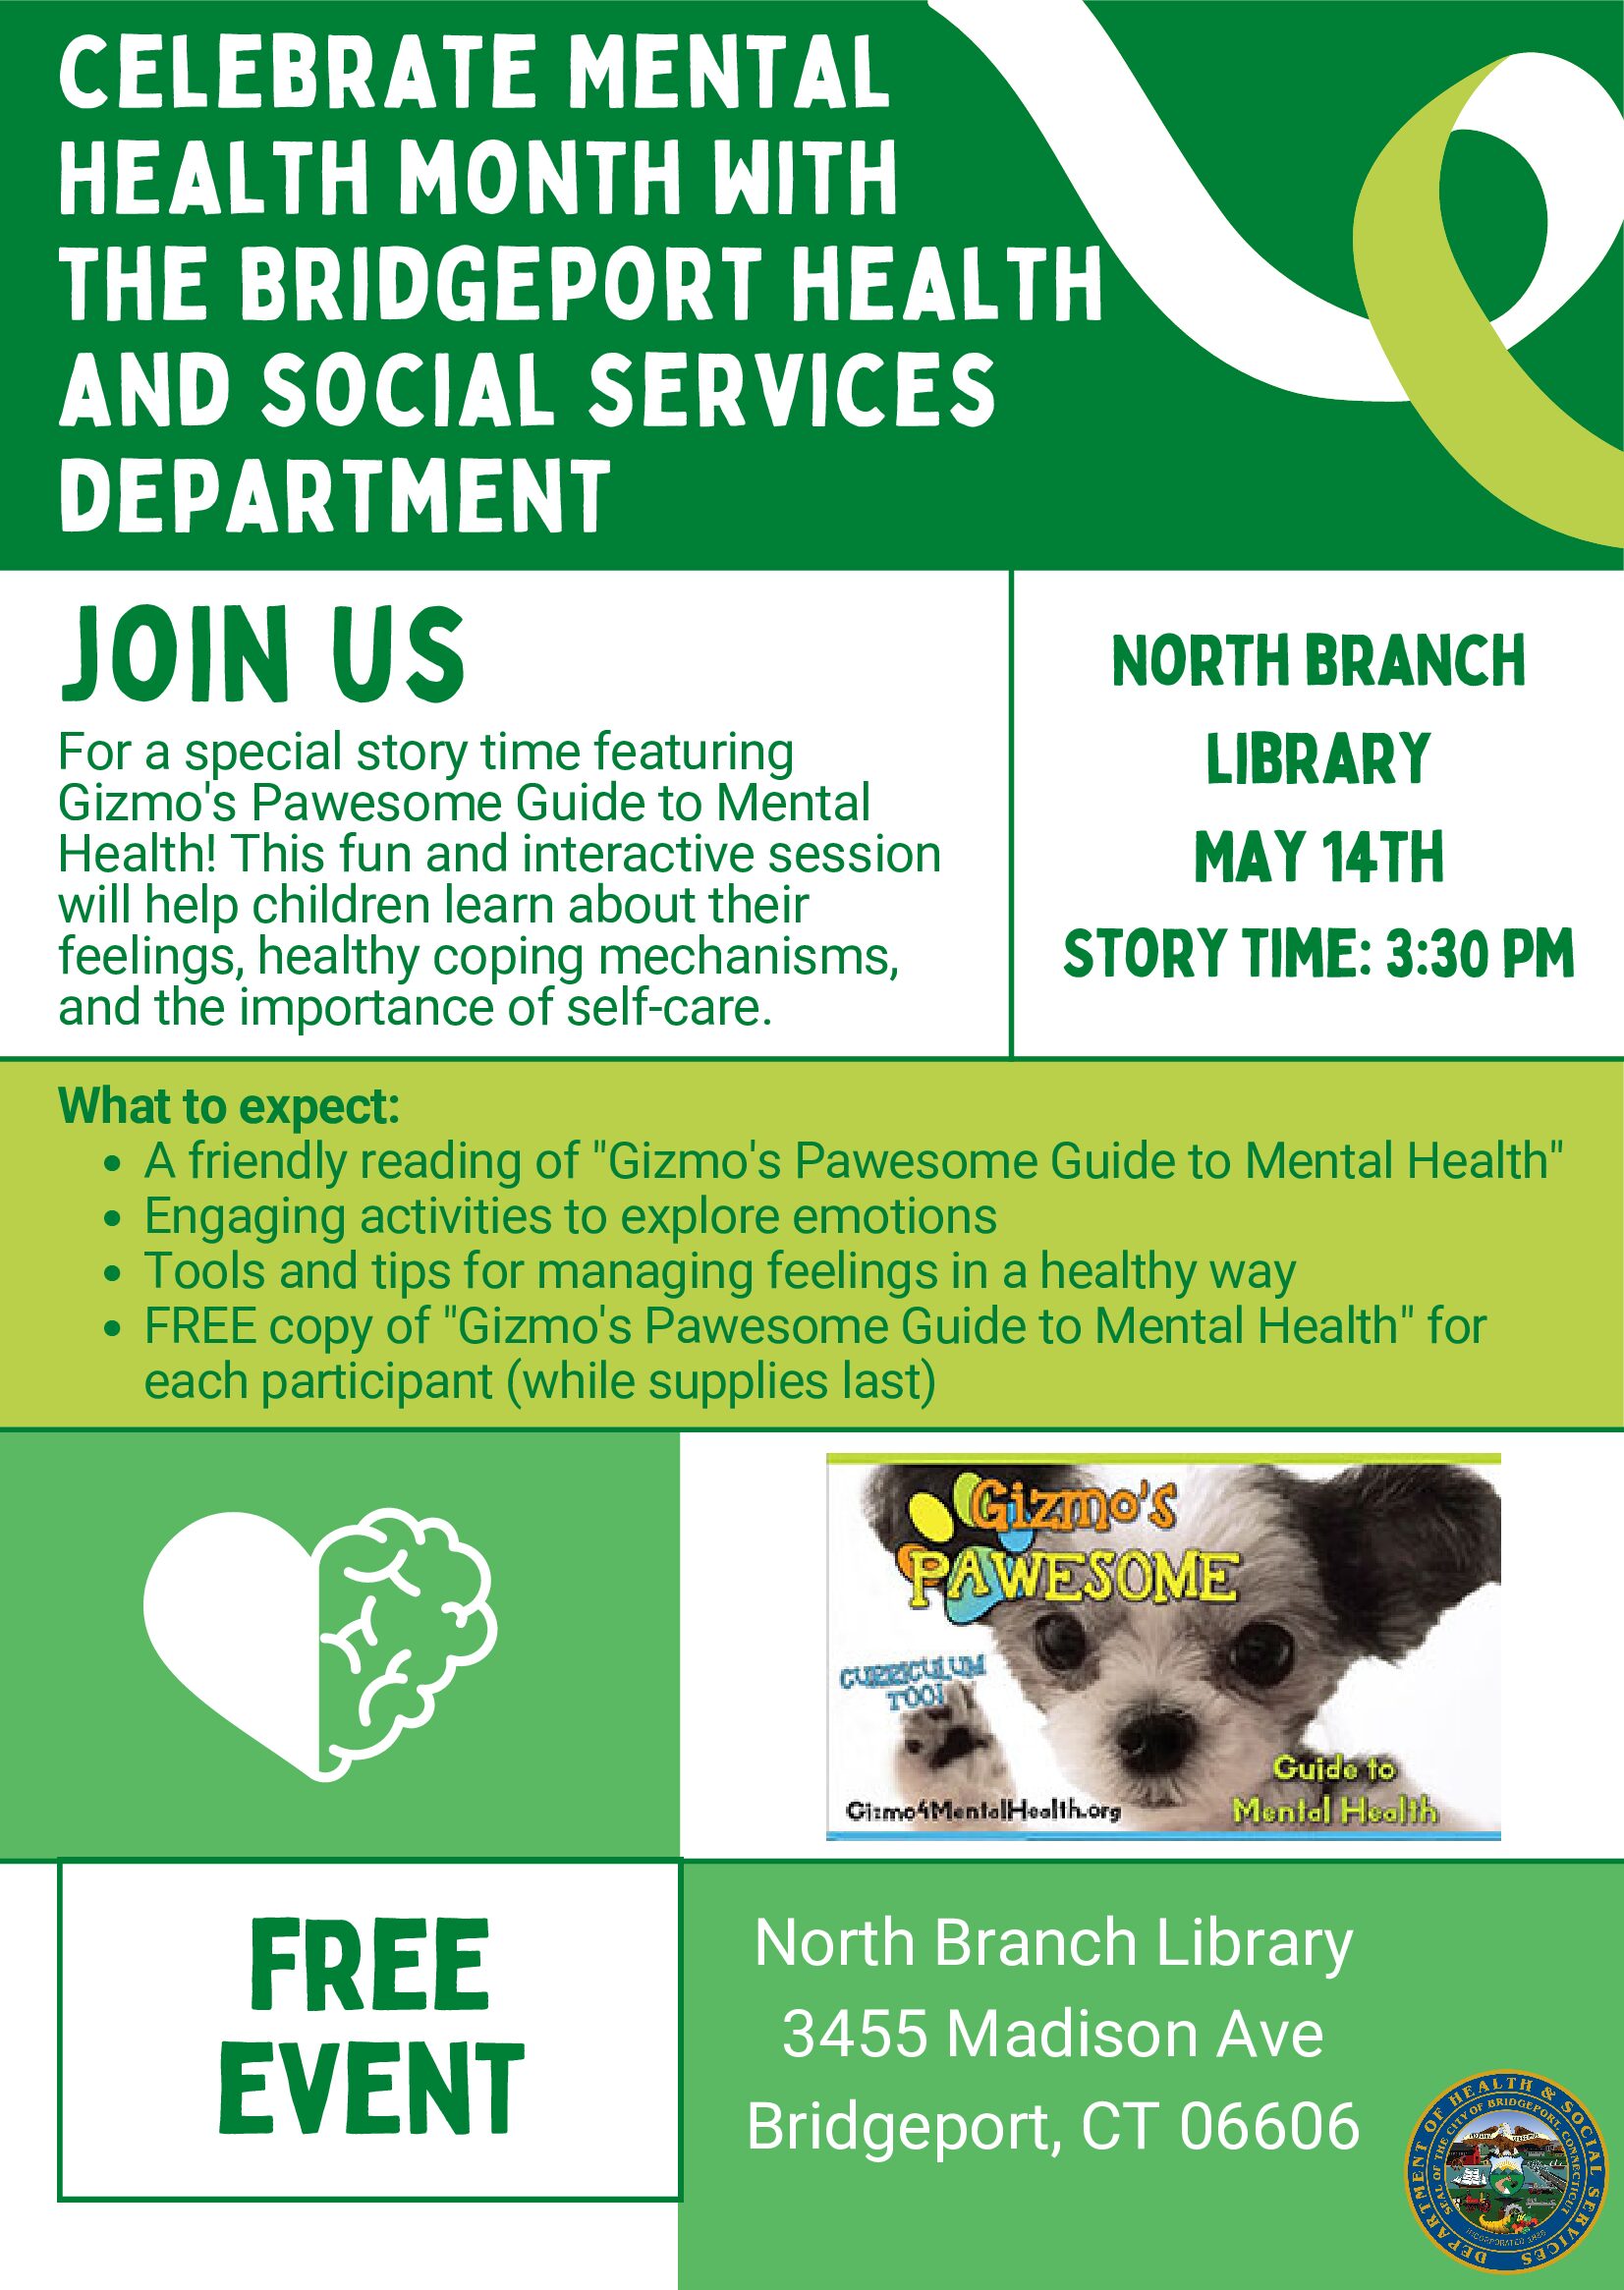 Celebrate Mental Health Month with the Bridgeport Health and Social Services Department